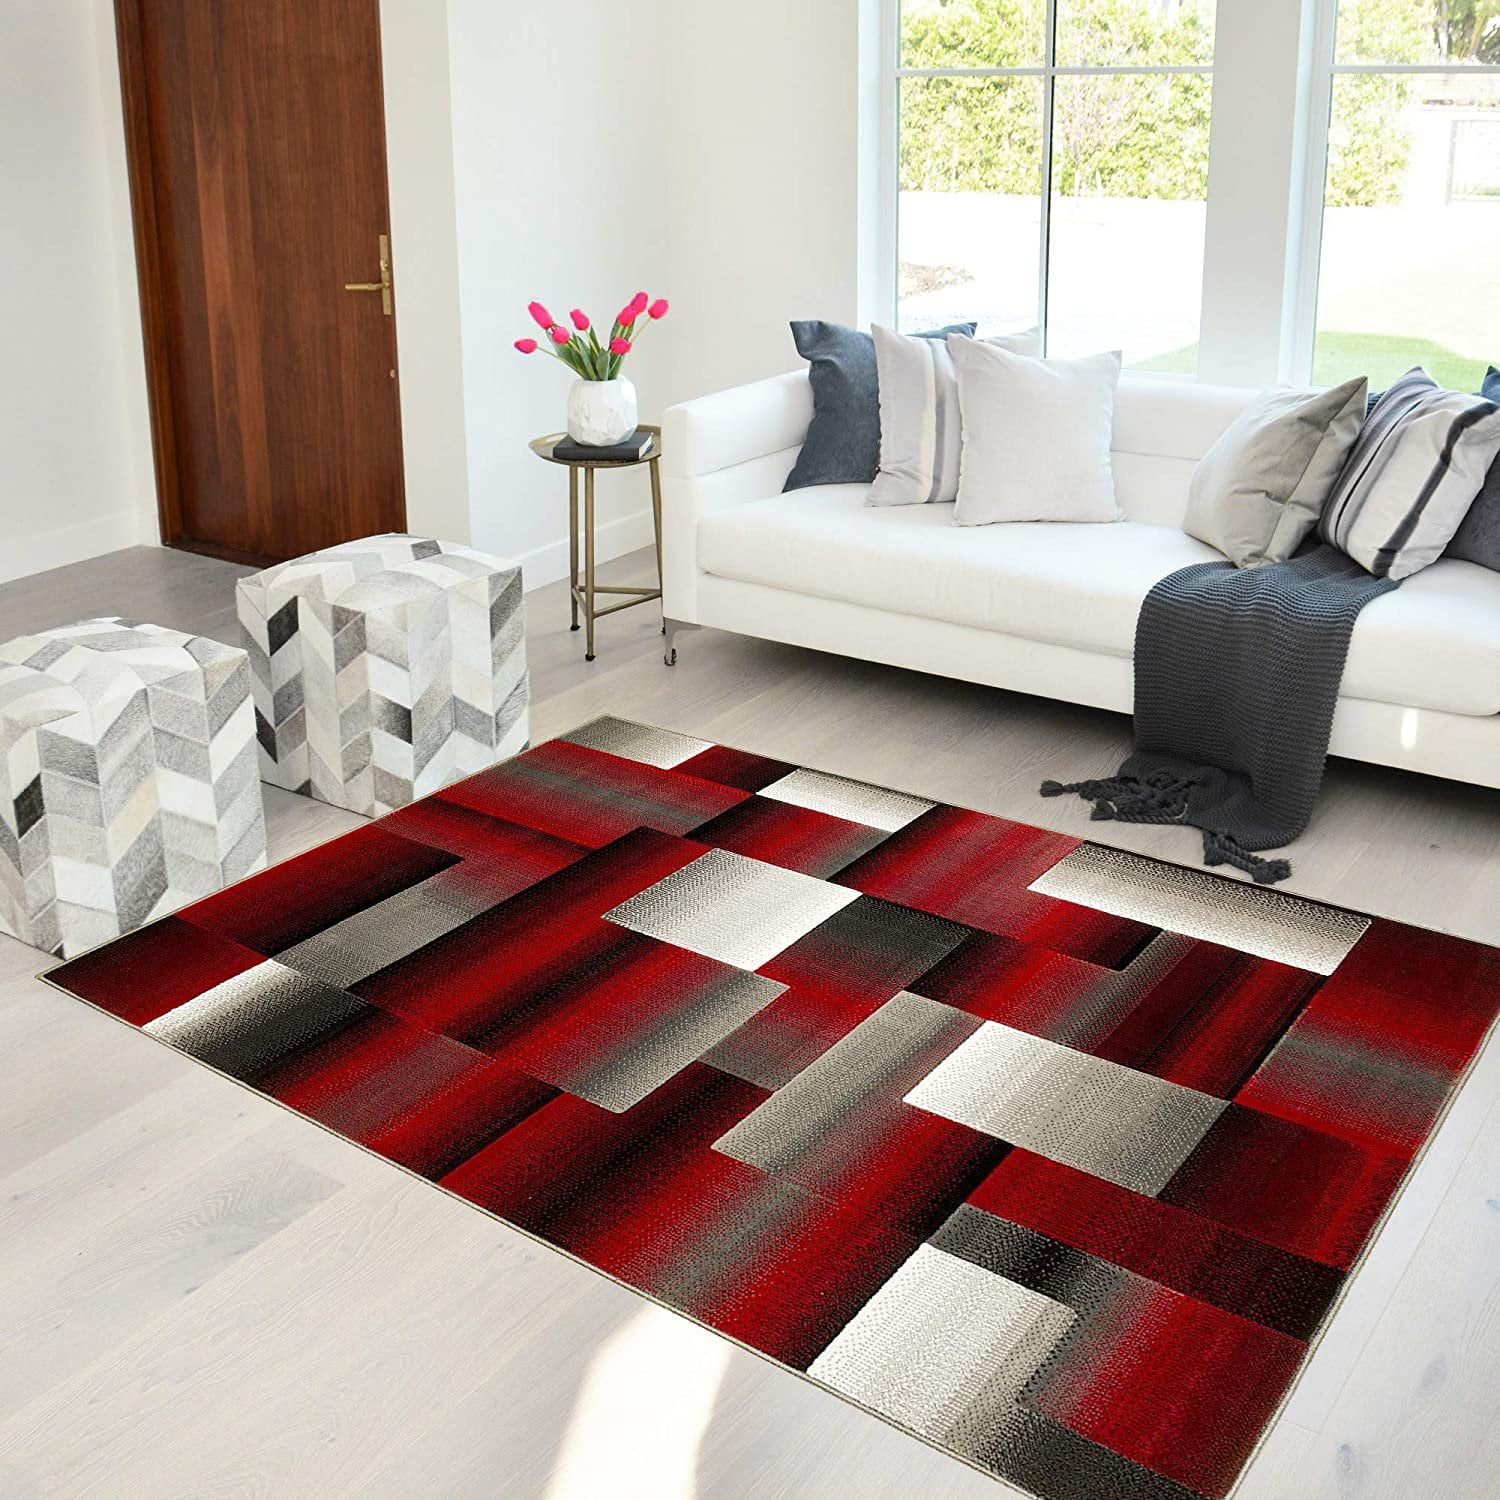 Handcraft Rugs Red Black Gray Abstract, Red Black Gray White Rug